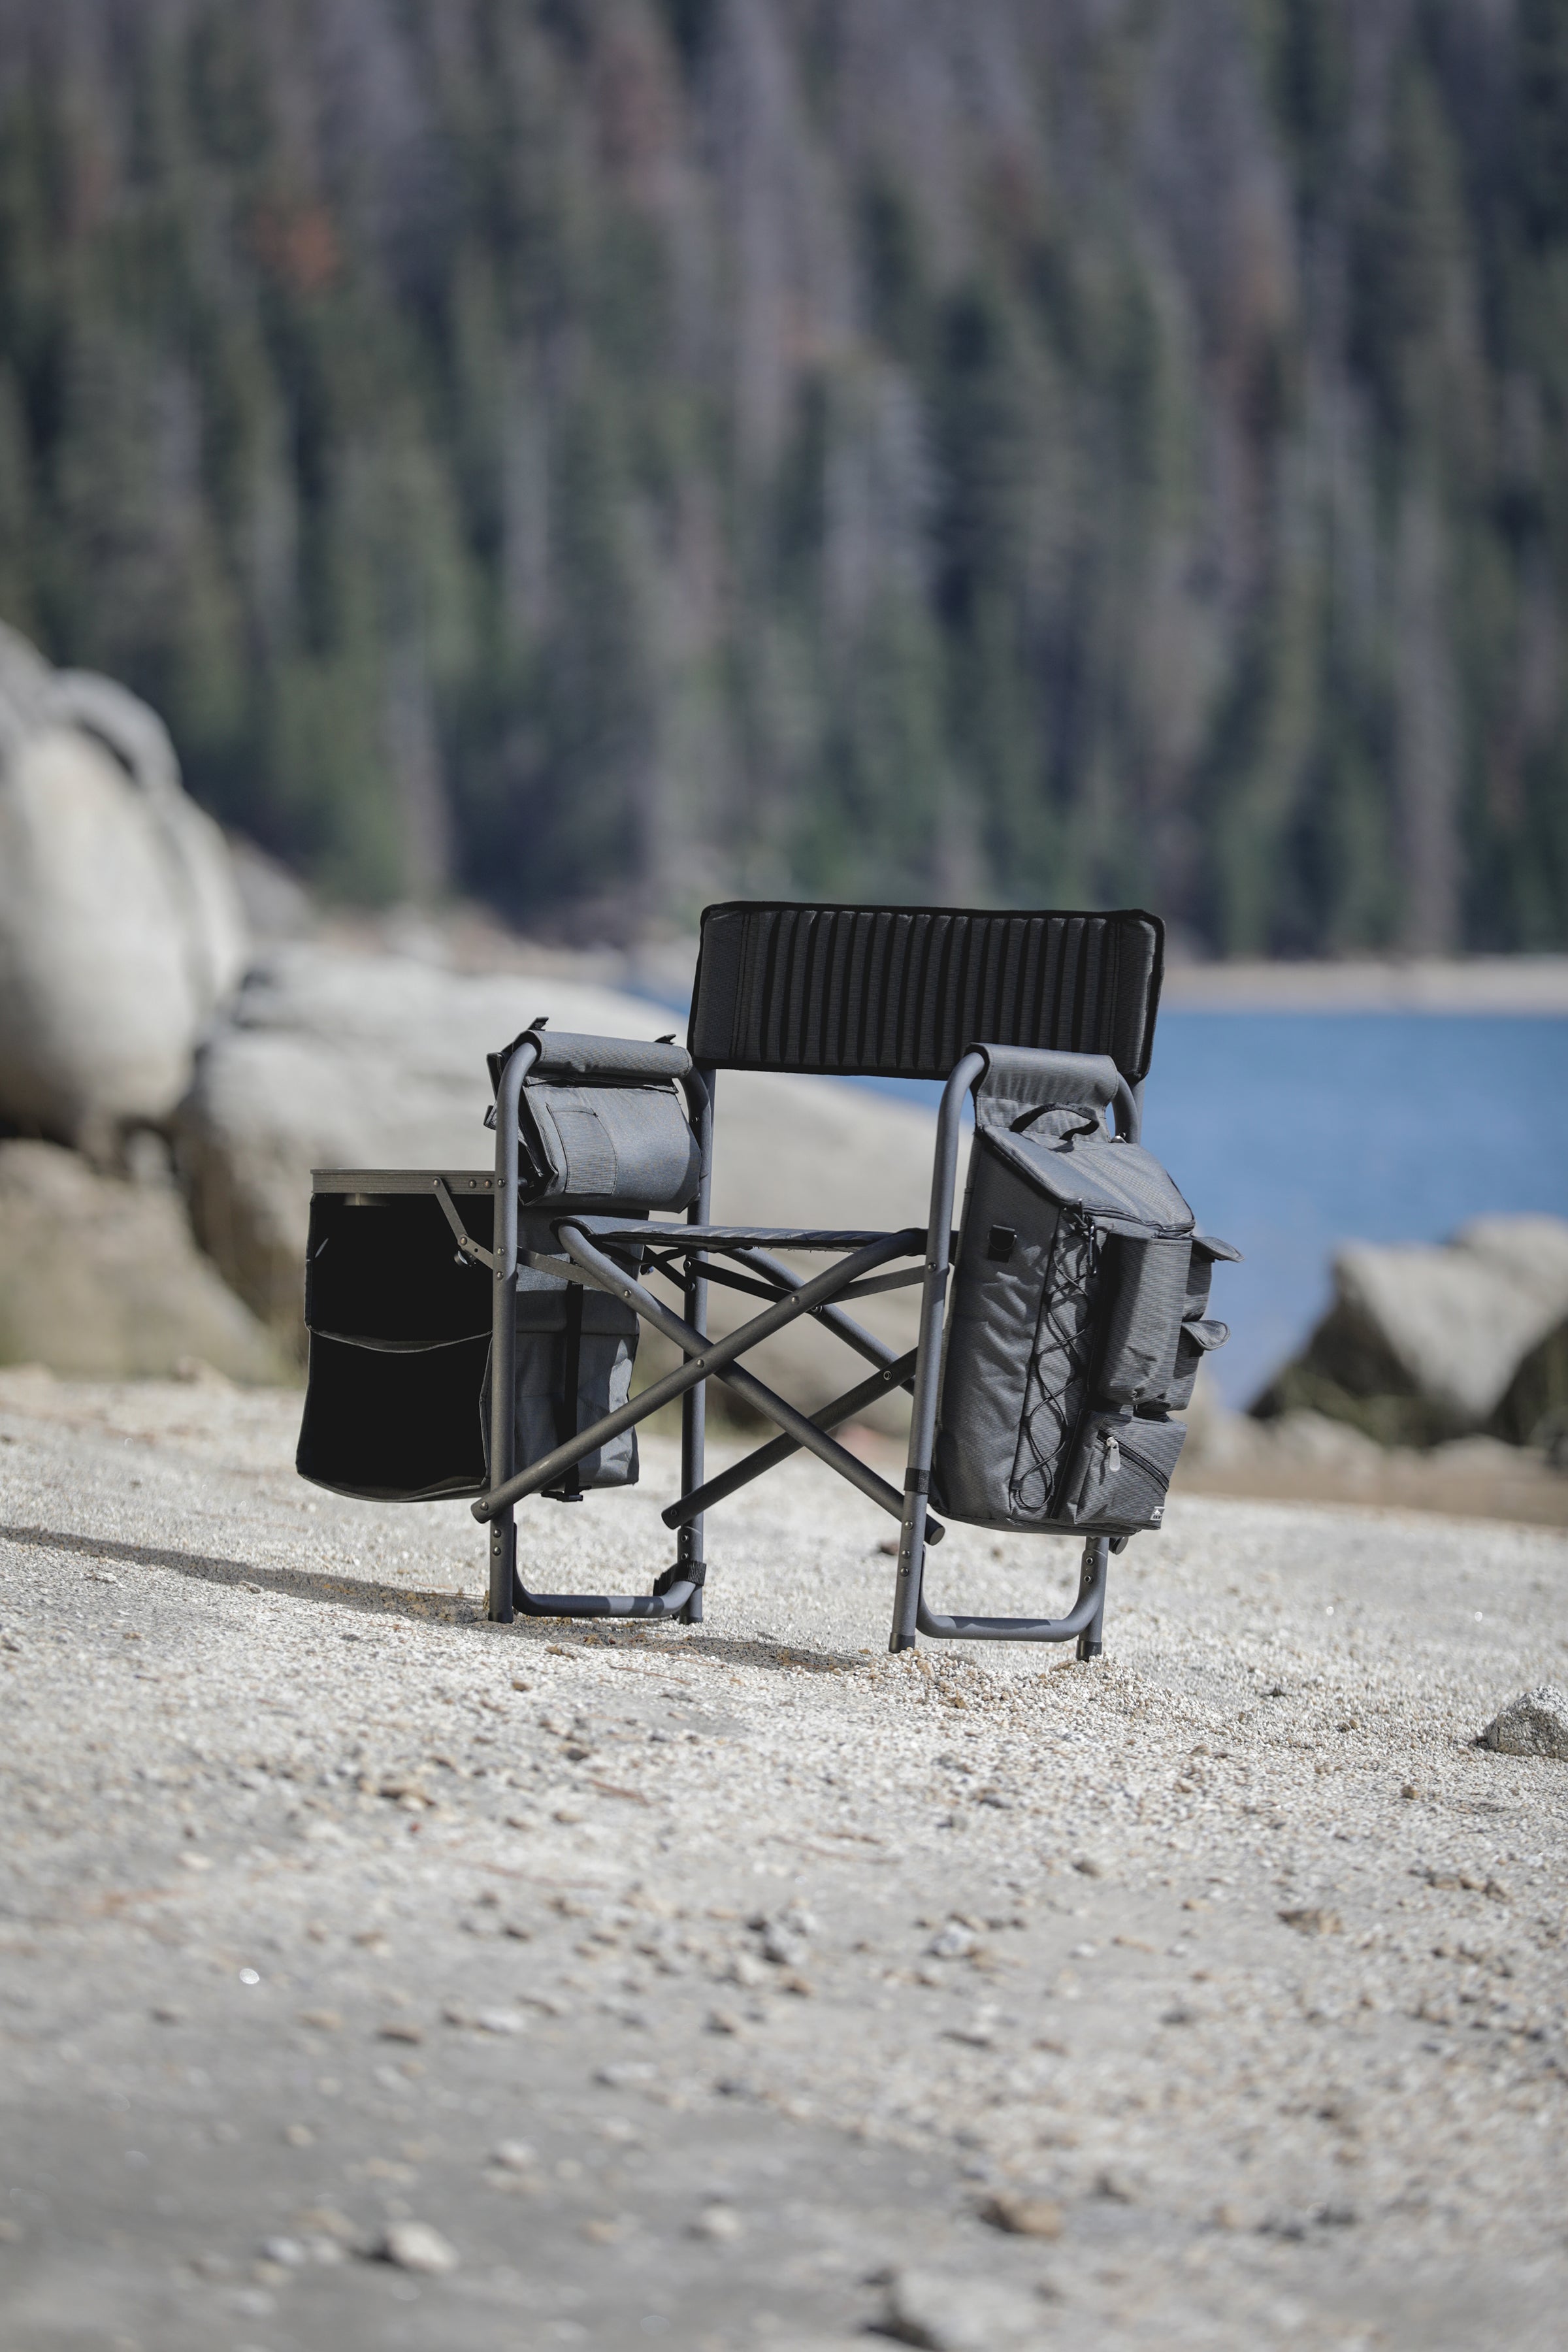 Seattle Seahawks - Fusion Camping Chair